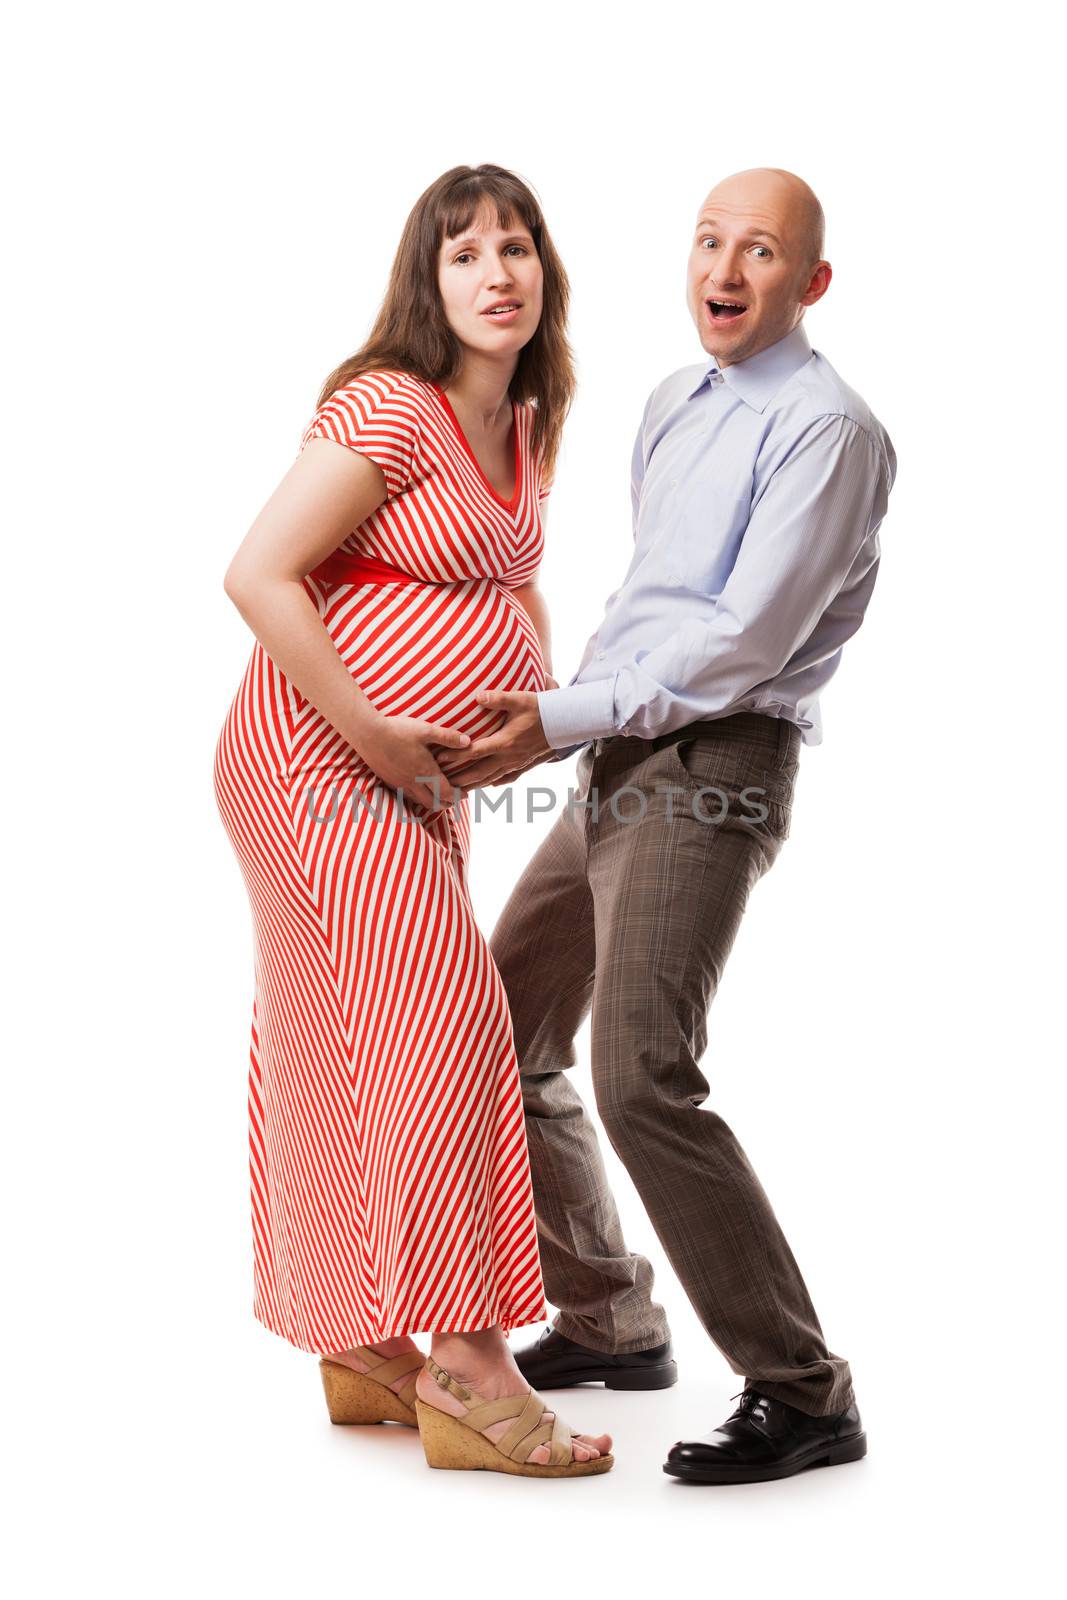 Pregnancy and new life concept - amazed or surprised parents holding pregnant woman abdomen